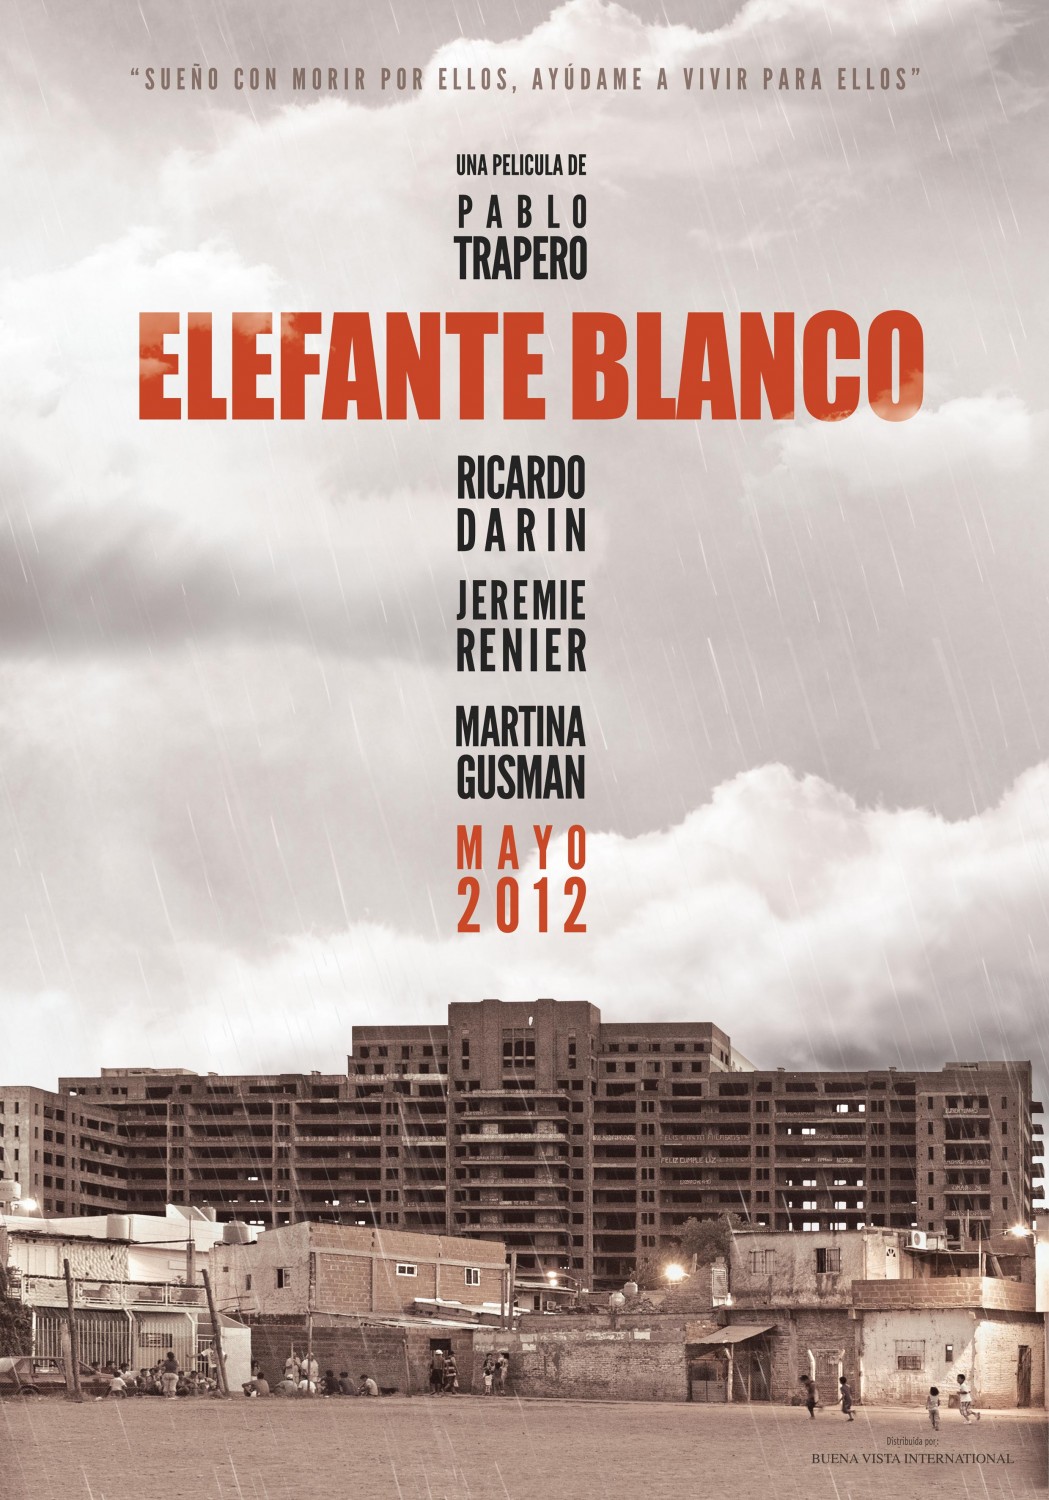 Extra Large Movie Poster Image for Elefante blanco (#1 of 7)